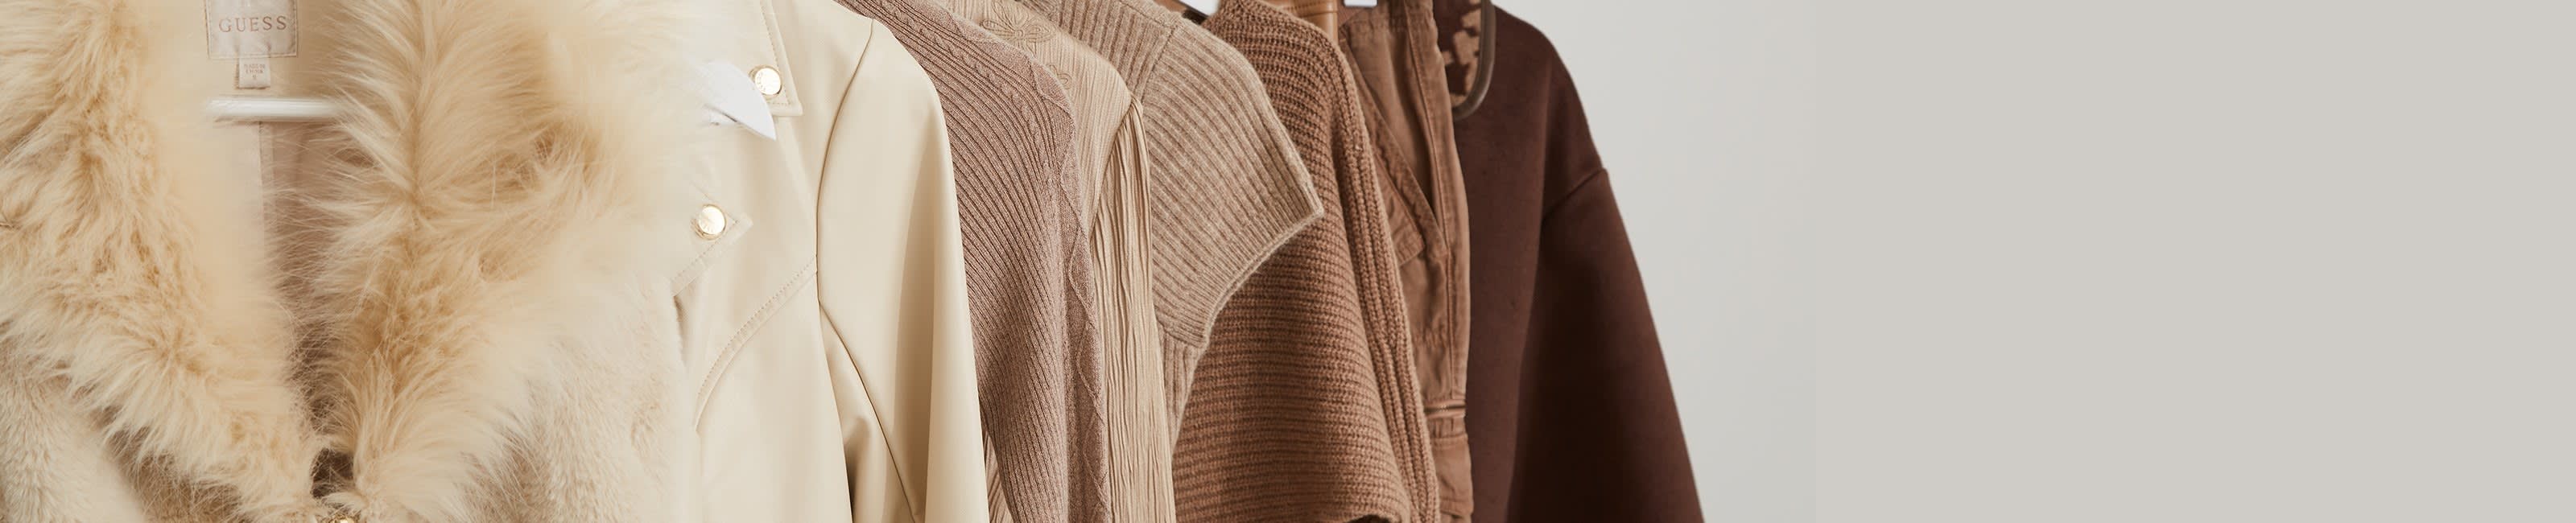 Toffee: Warm caramel hues revealed in luxe textures